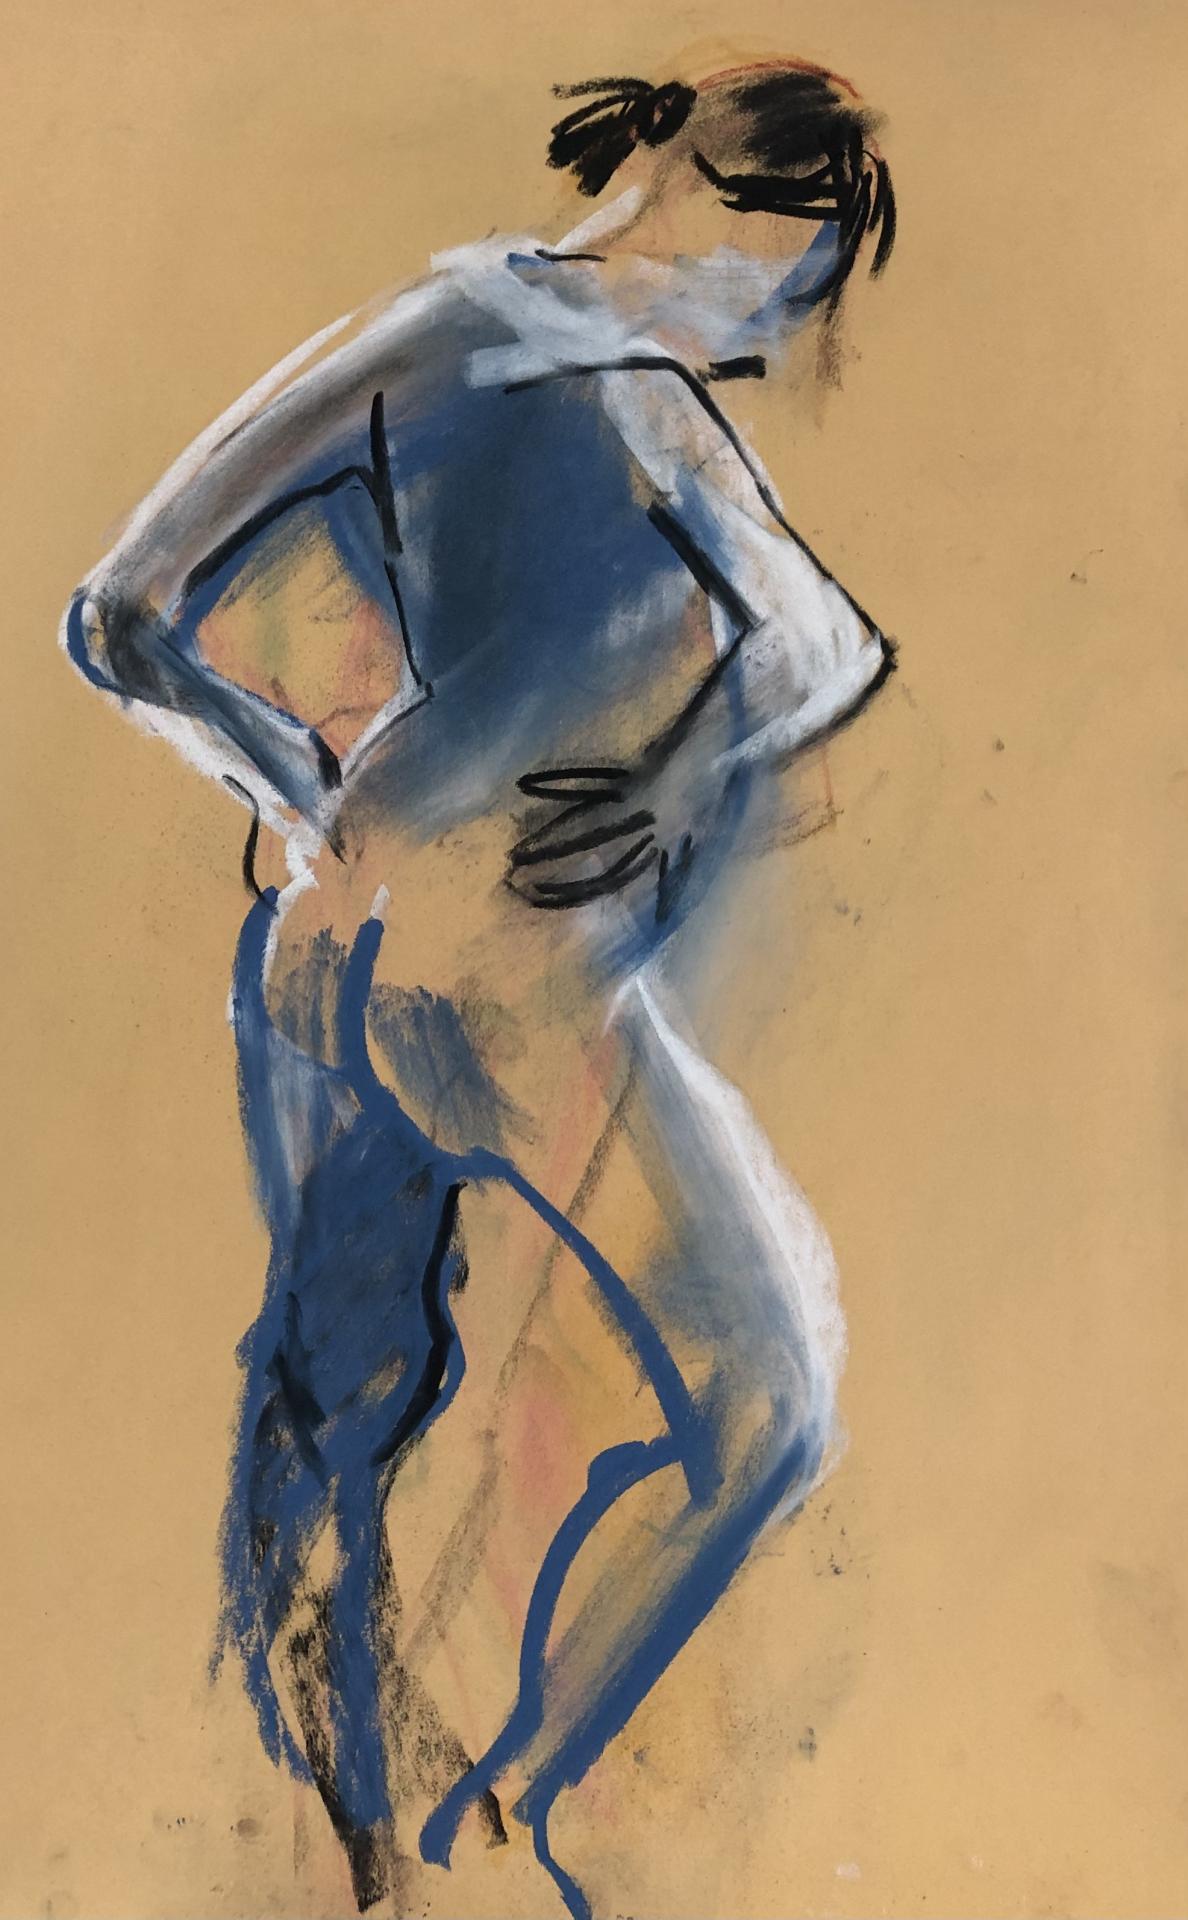 ABSTRACT NUDE 2